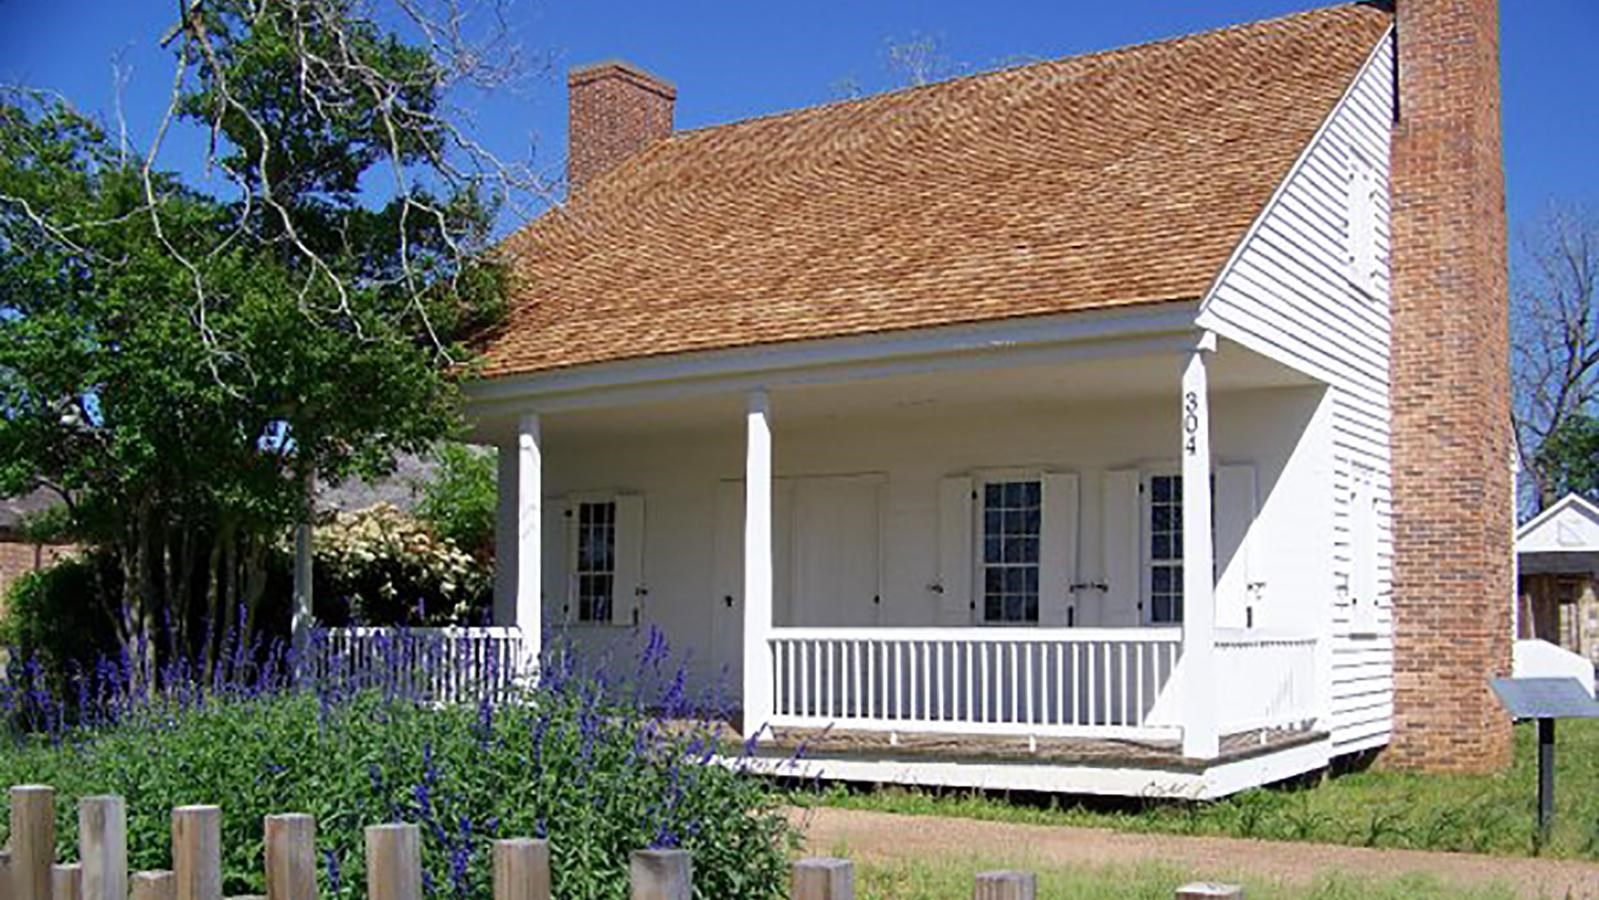 A small, white, cottage-like house with a shingled roof and double chimneys.